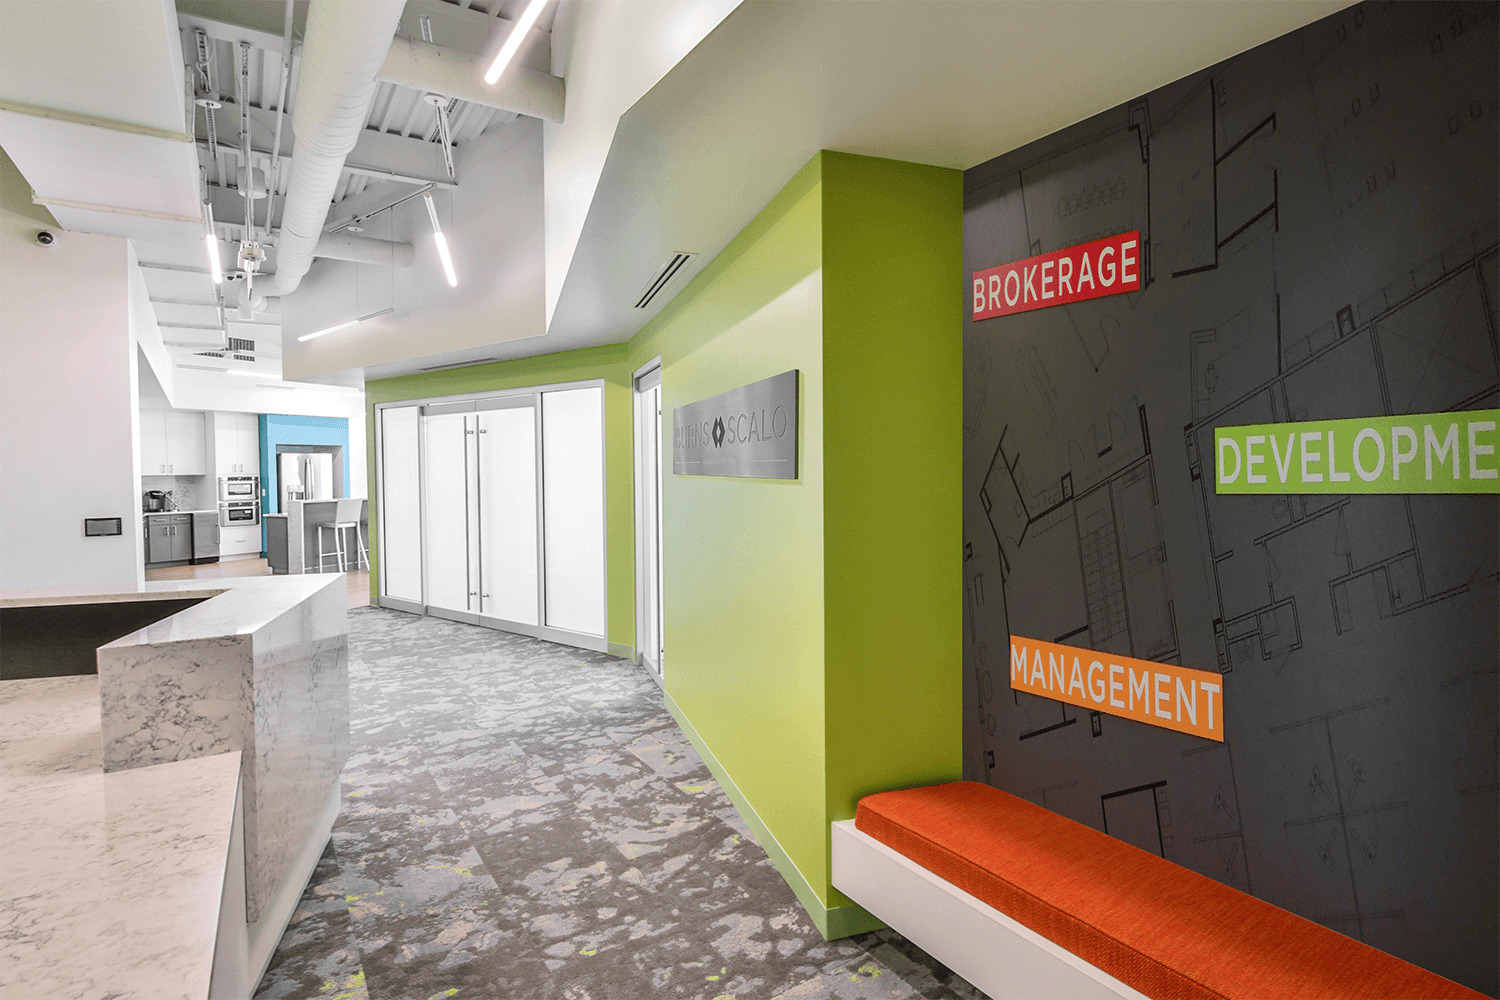 concierge area with a desk, a bright green hallway, and wall graphics